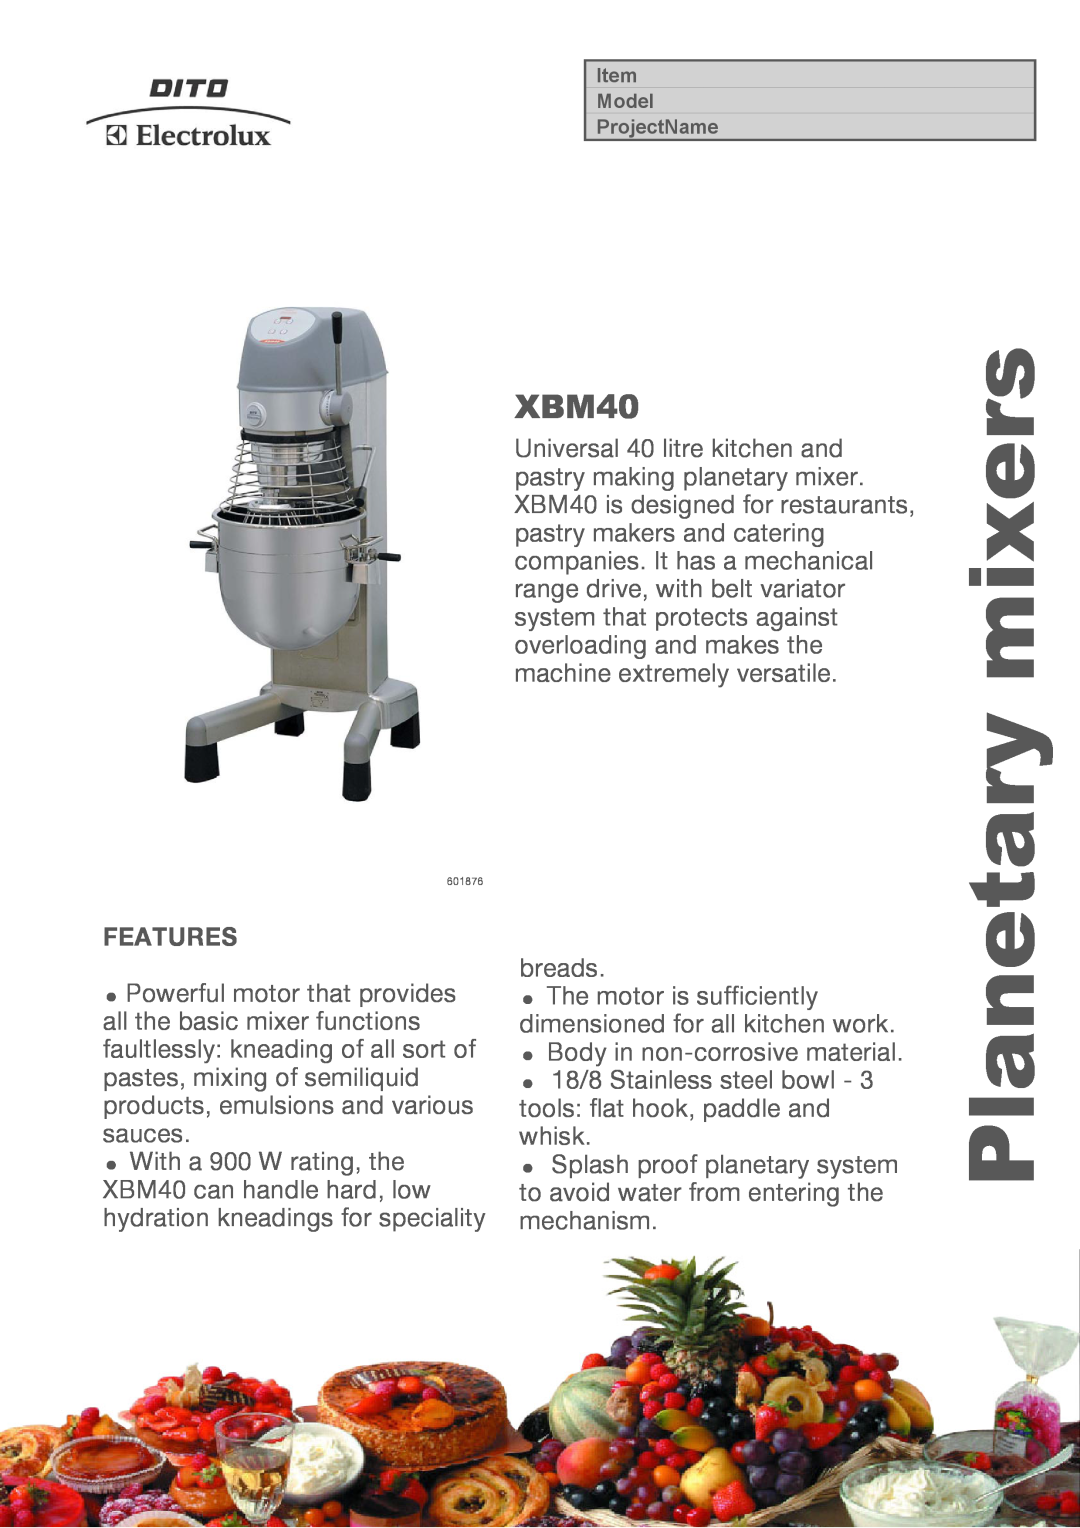 Electrolux XBM40, XBMF40S36, XBMF40S5, XBMF40S35 manual Features, mixers, Planetary 